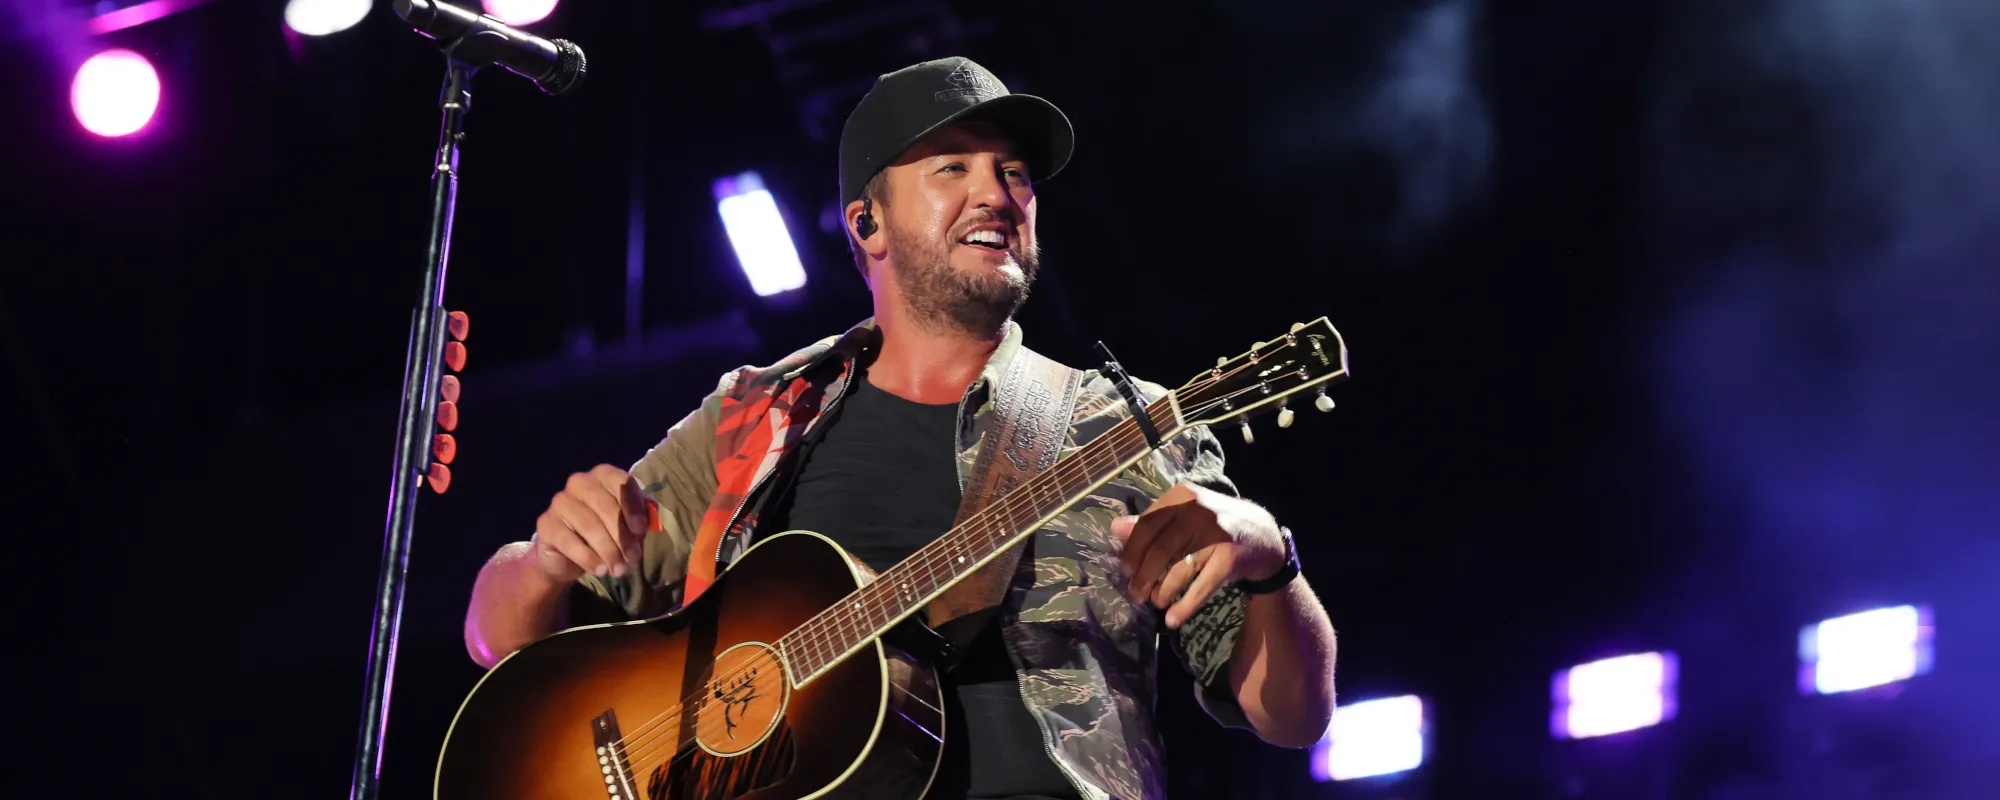 Luke Bryan, Keith Urban Decorate Christmas Trees to Benefit First Responders Children’s Foundation